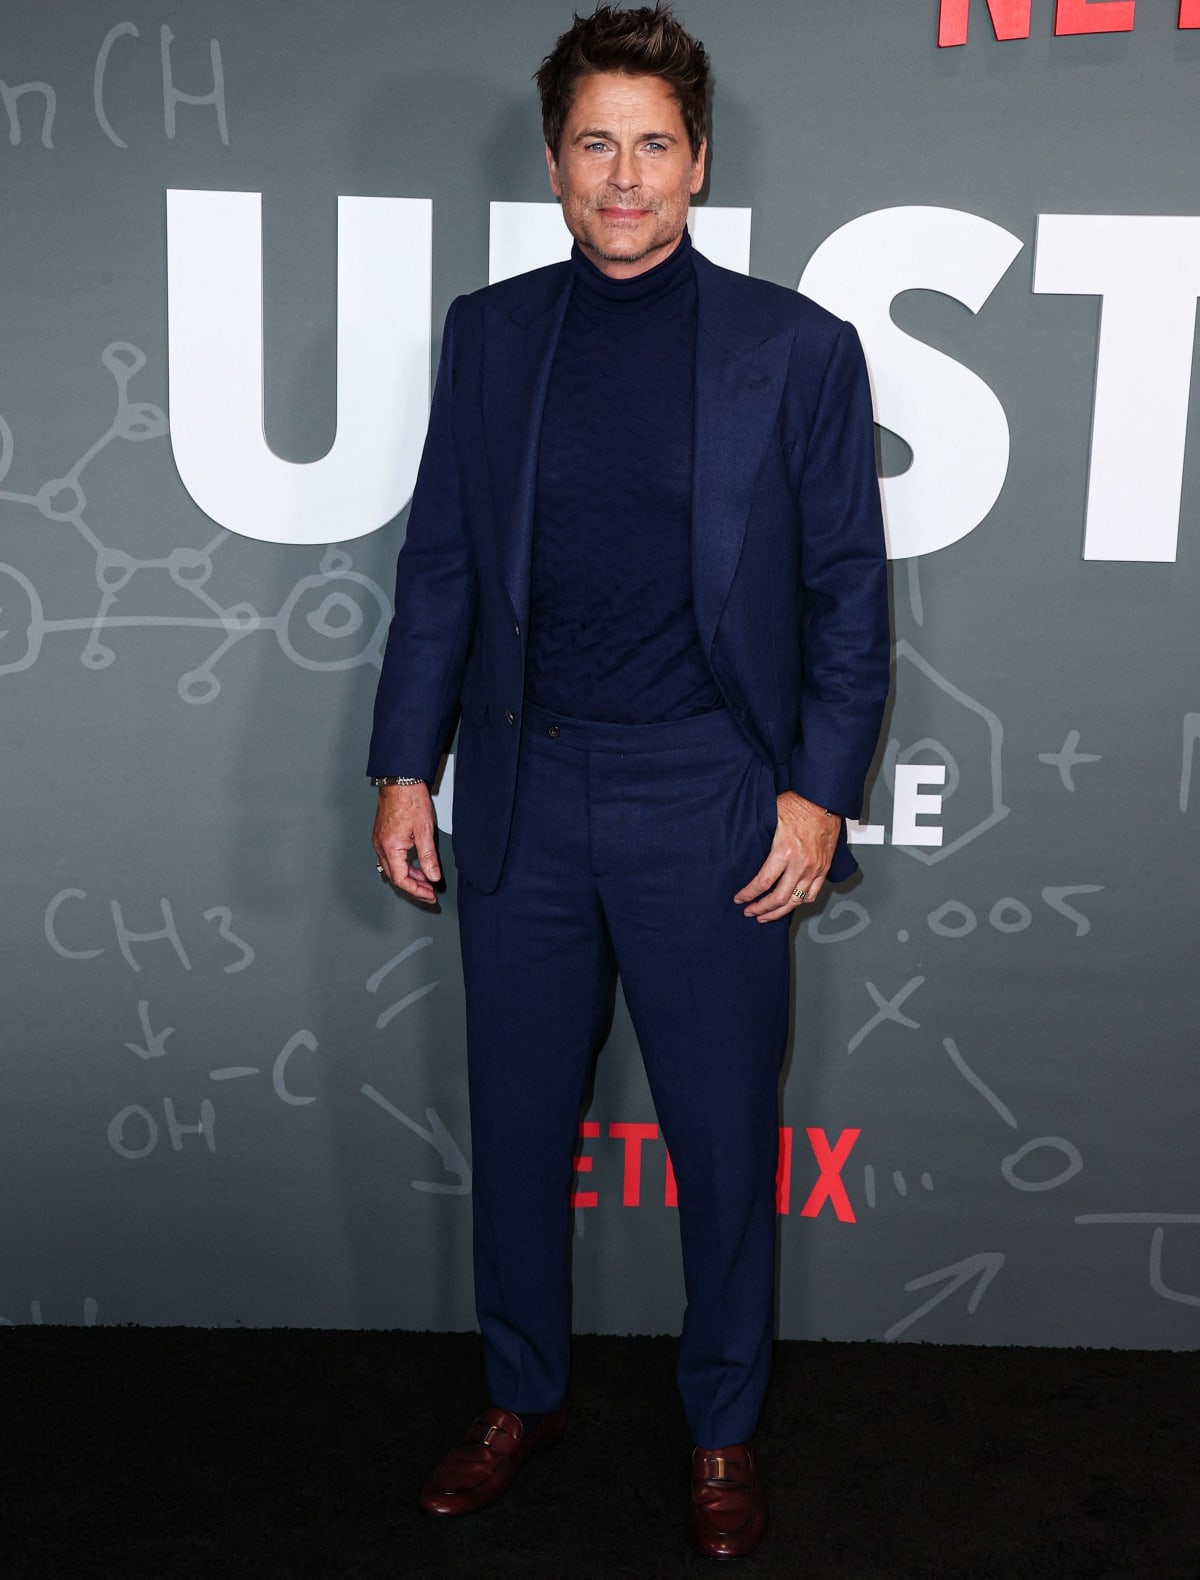 Rob Lowe attending the premiere of Unstable